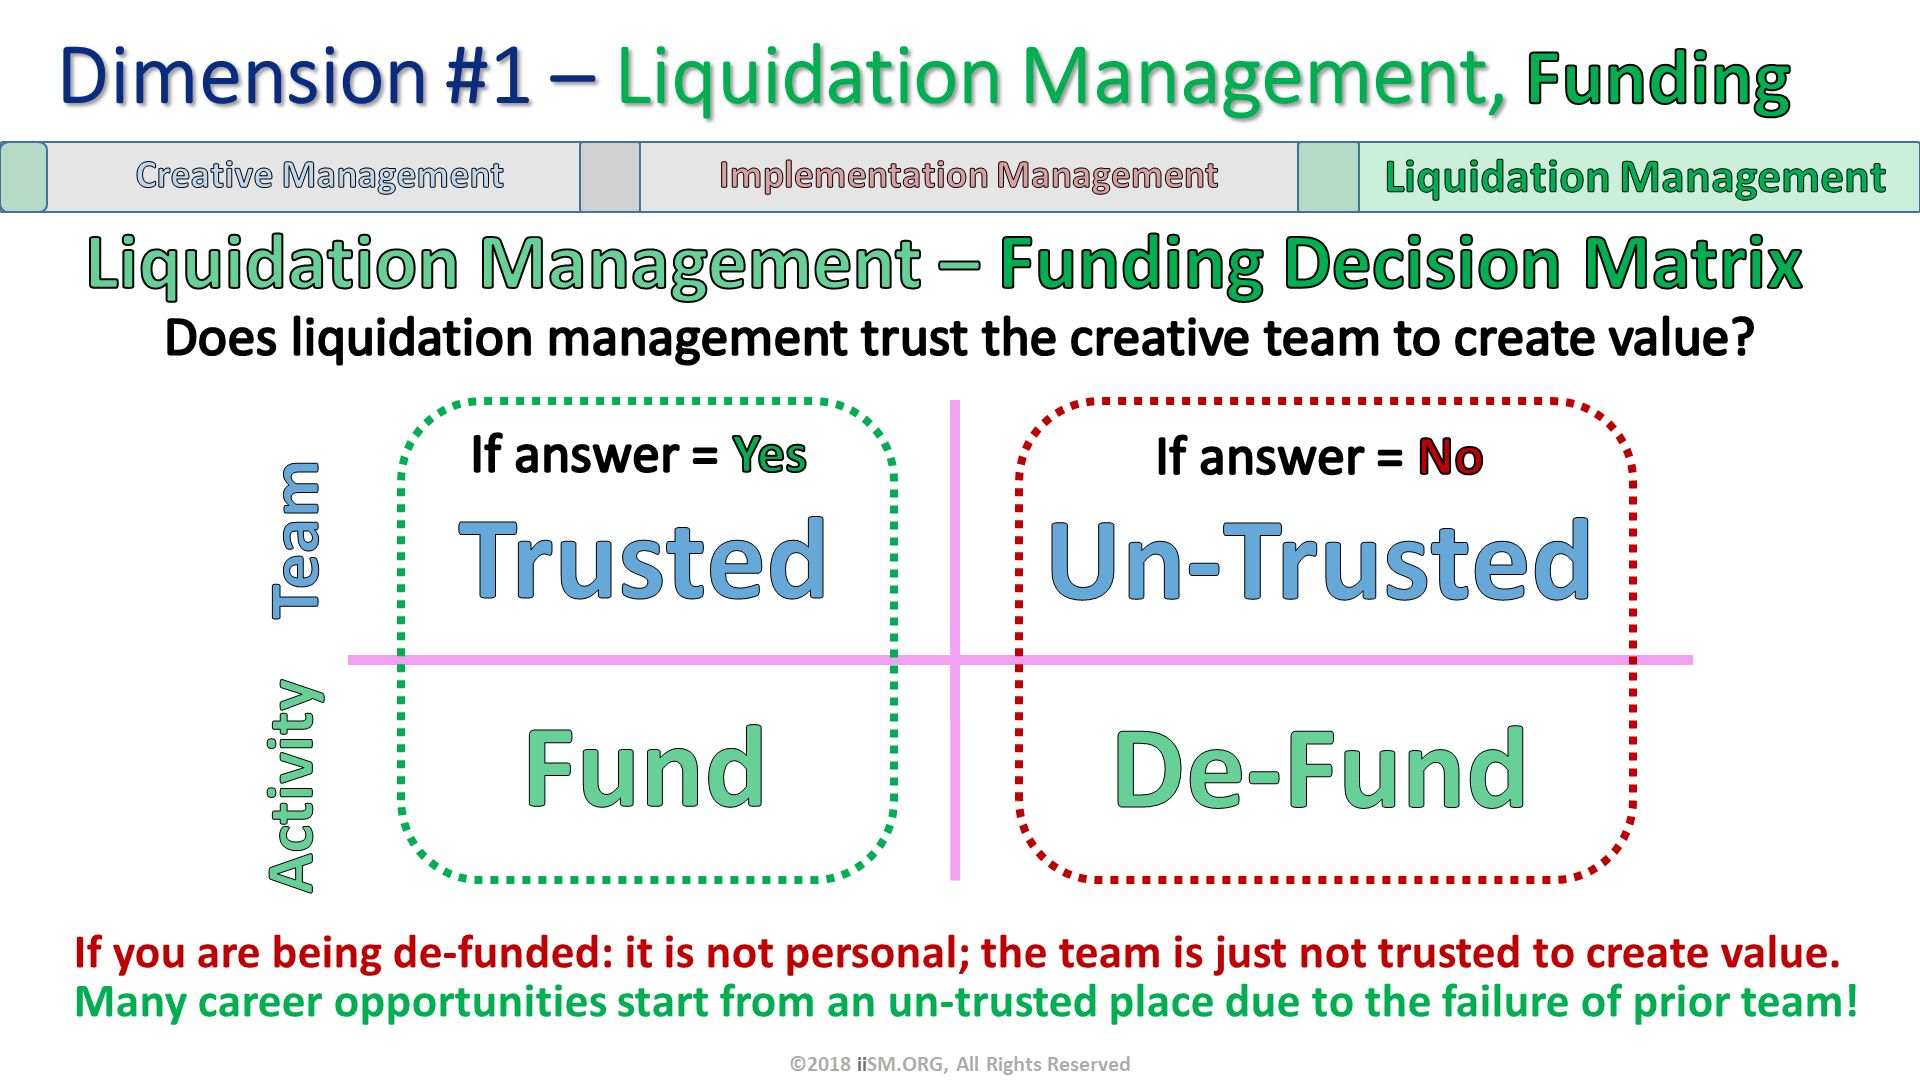 Dimension #1 – Liquidation Management, Funding. Liquidation Management – Funding Decision Matrix. Fund. De-Fund. Activity. Trusted. Un-Trusted. Team. ©2018 iiSM.ORG, All Rights Reserved. If answer = Yes. If answer = No. Does liquidation management trust the creative team to create value?. If you are being de-funded: it is not personal; the team is just not trusted to create value.Many career opportunities start from an un-trusted place due to the failure of prior team!. 